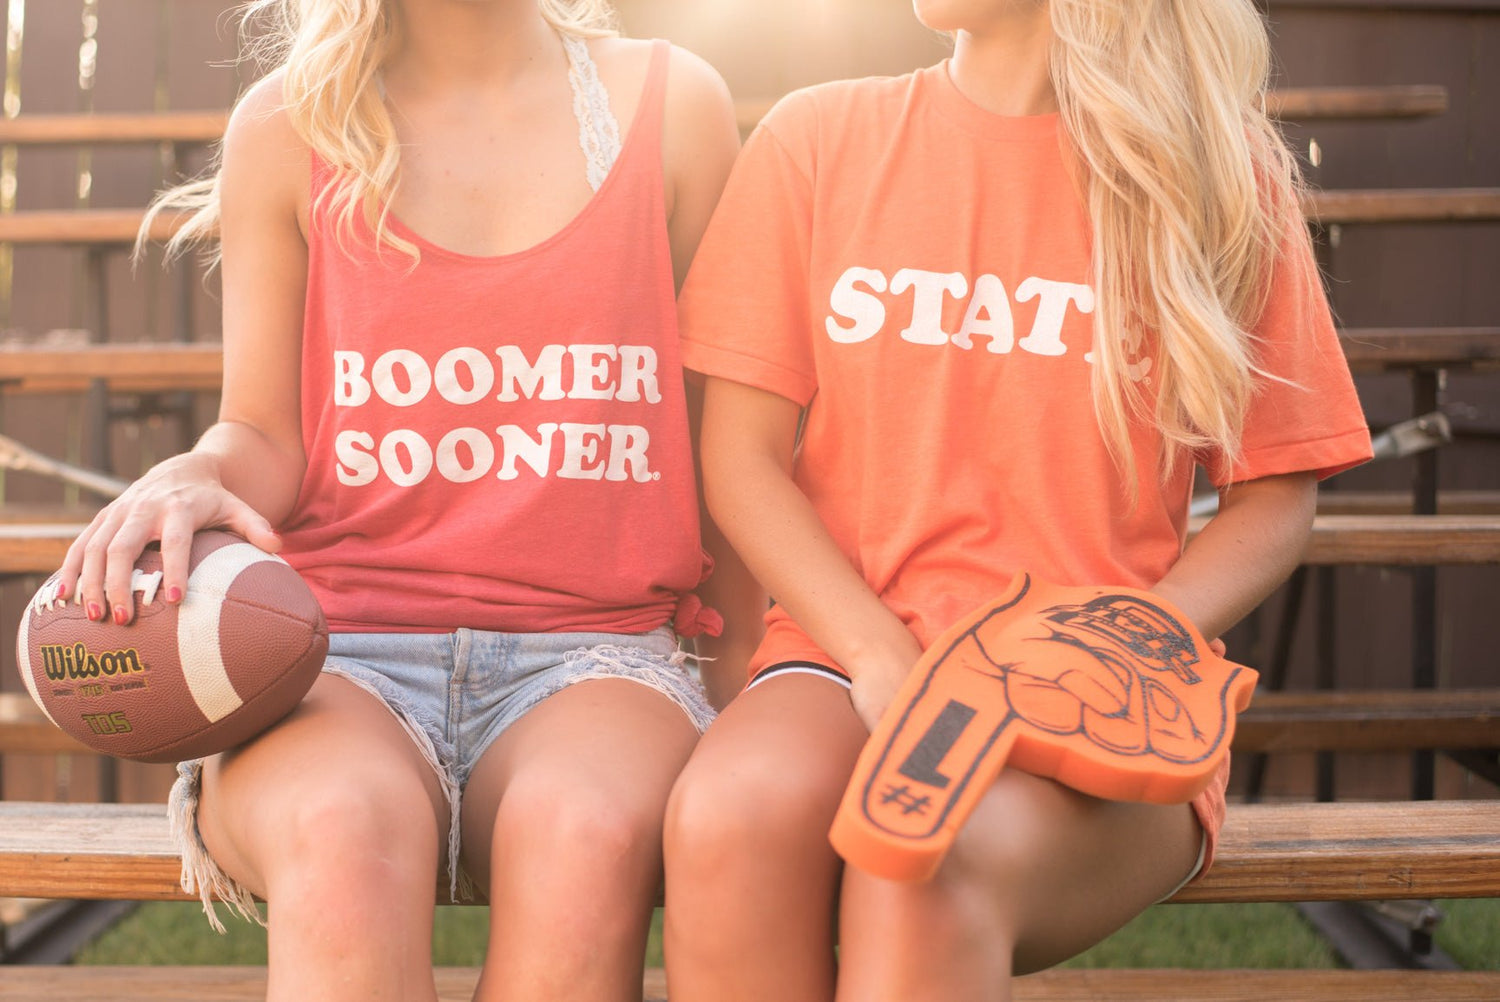 Officially licensed trendy t-shirts and tanks for The University of Oklahoma Sooners, Oklahoma State Cowboys, and University of Central Oklahoma Bronchos